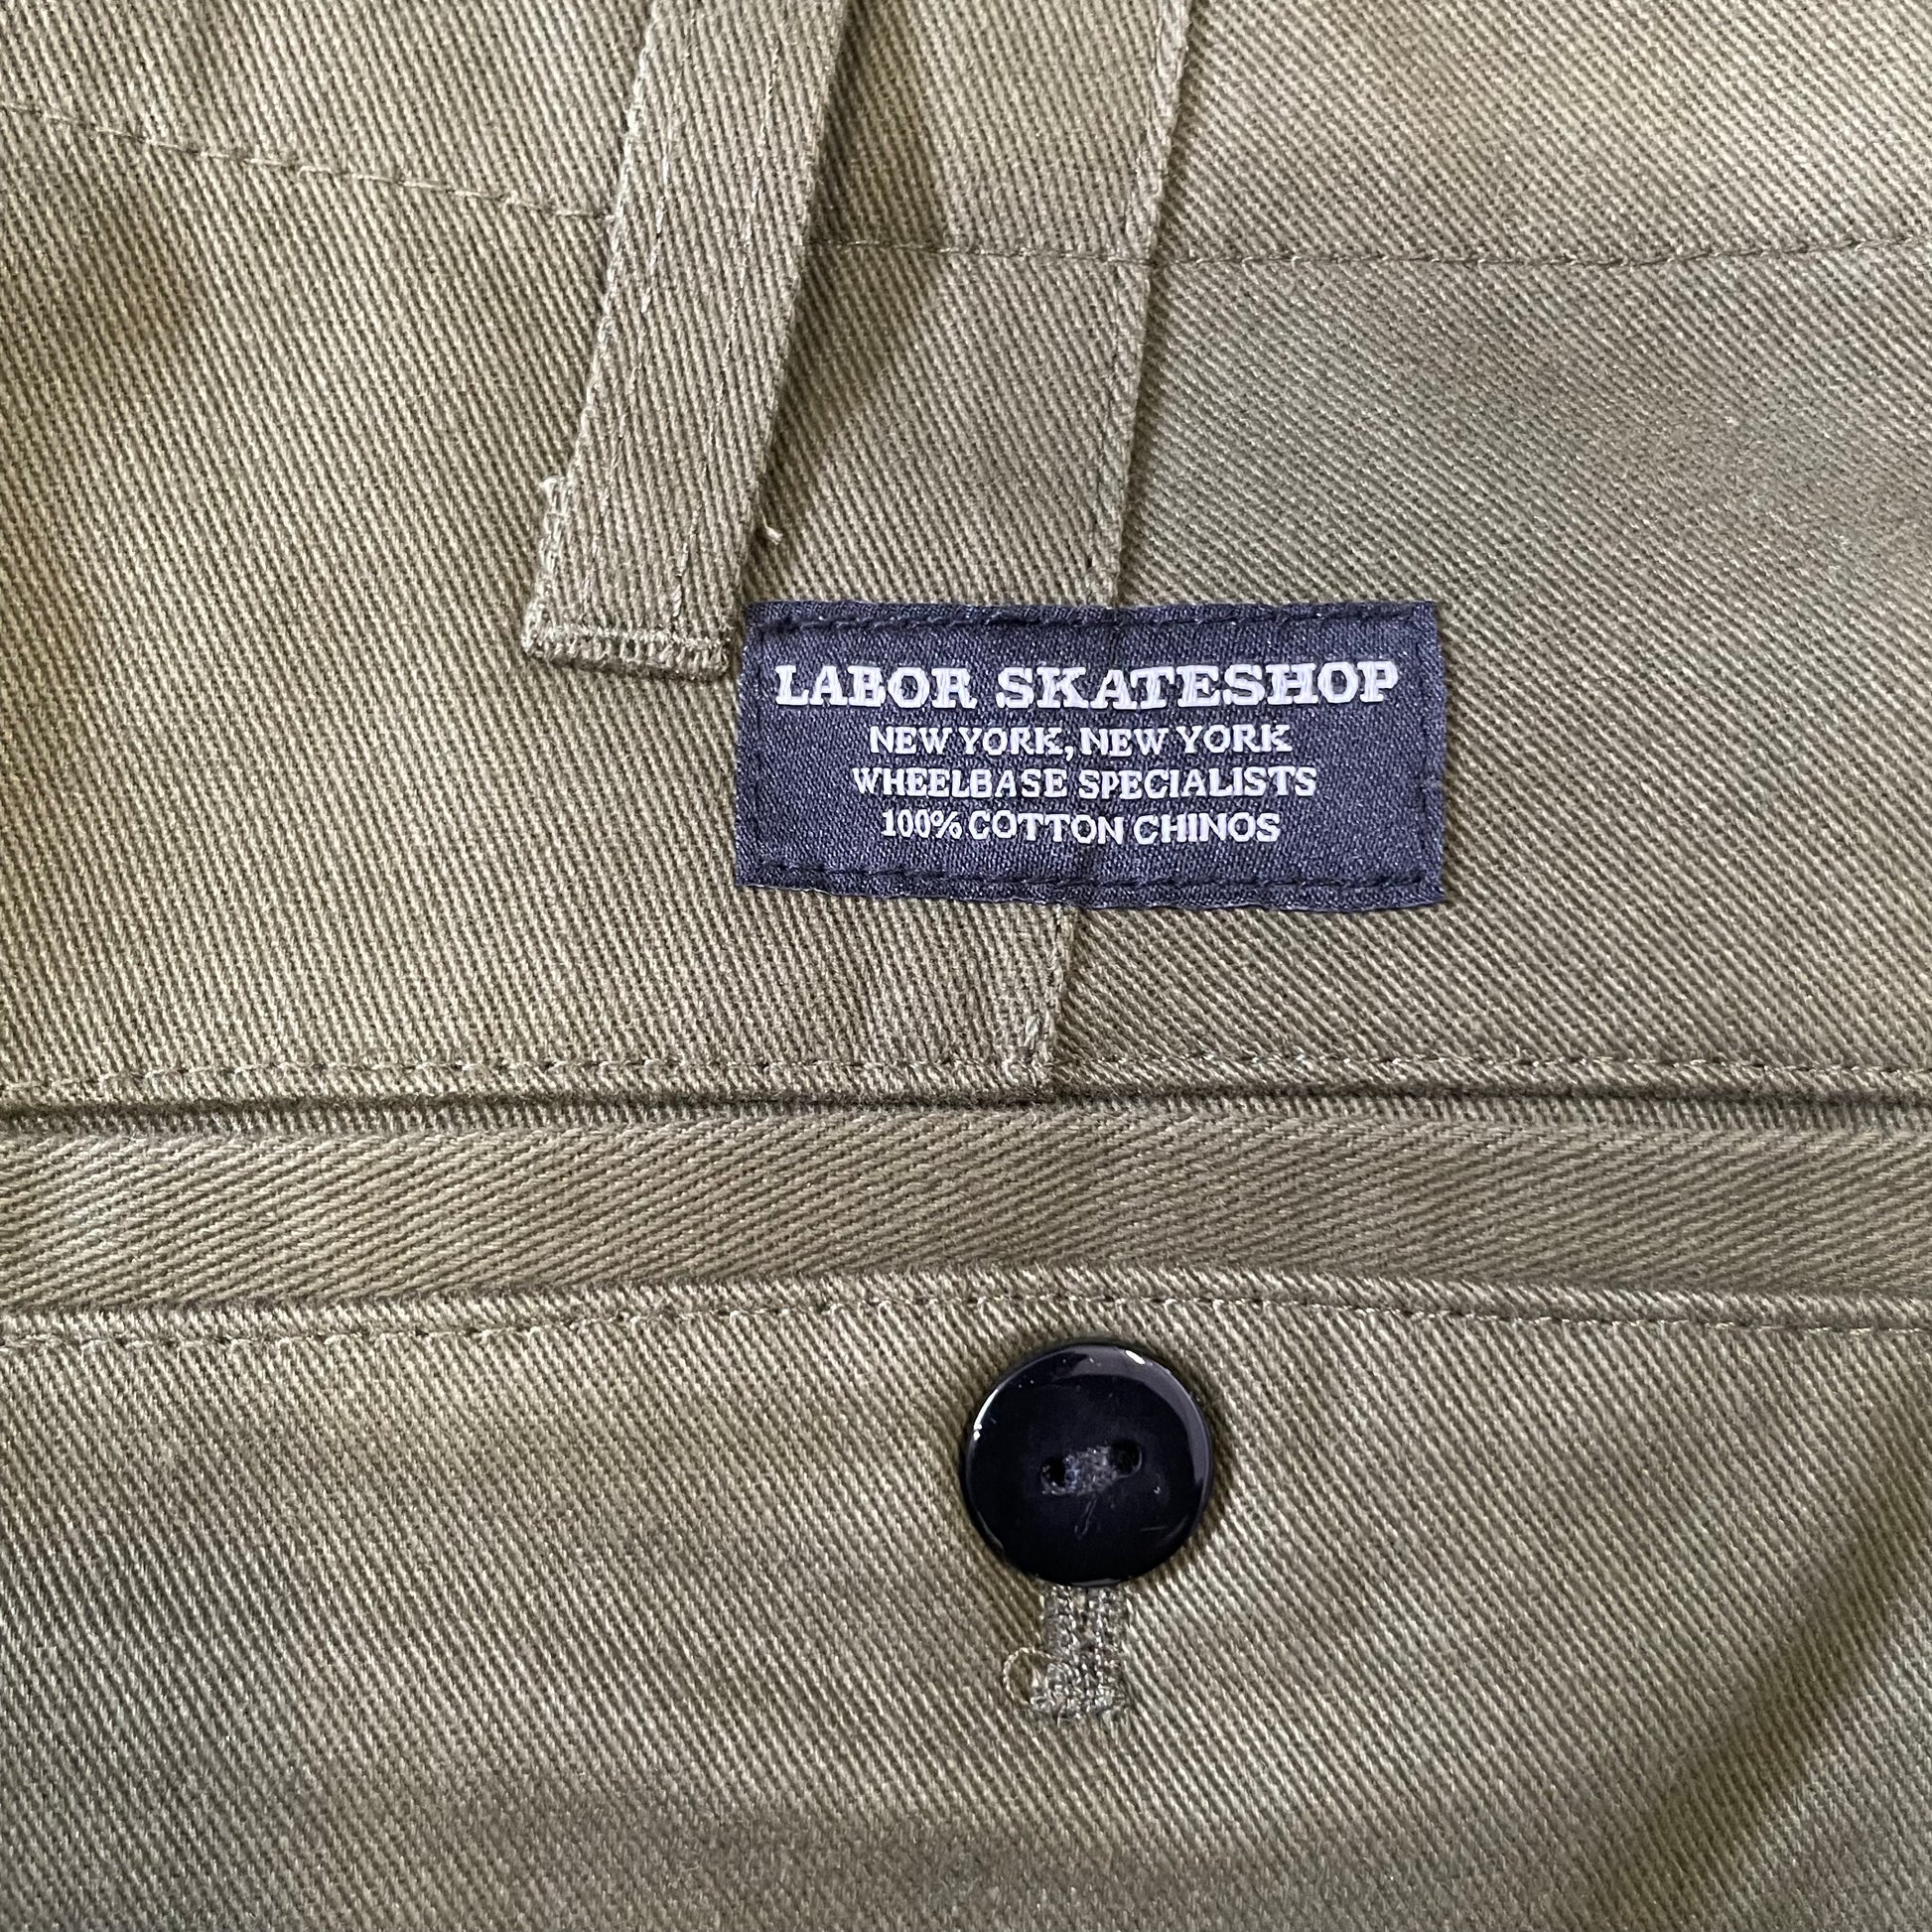 zoom view of woven label from Labor skateshop, new york, new york, wheelbase specialists